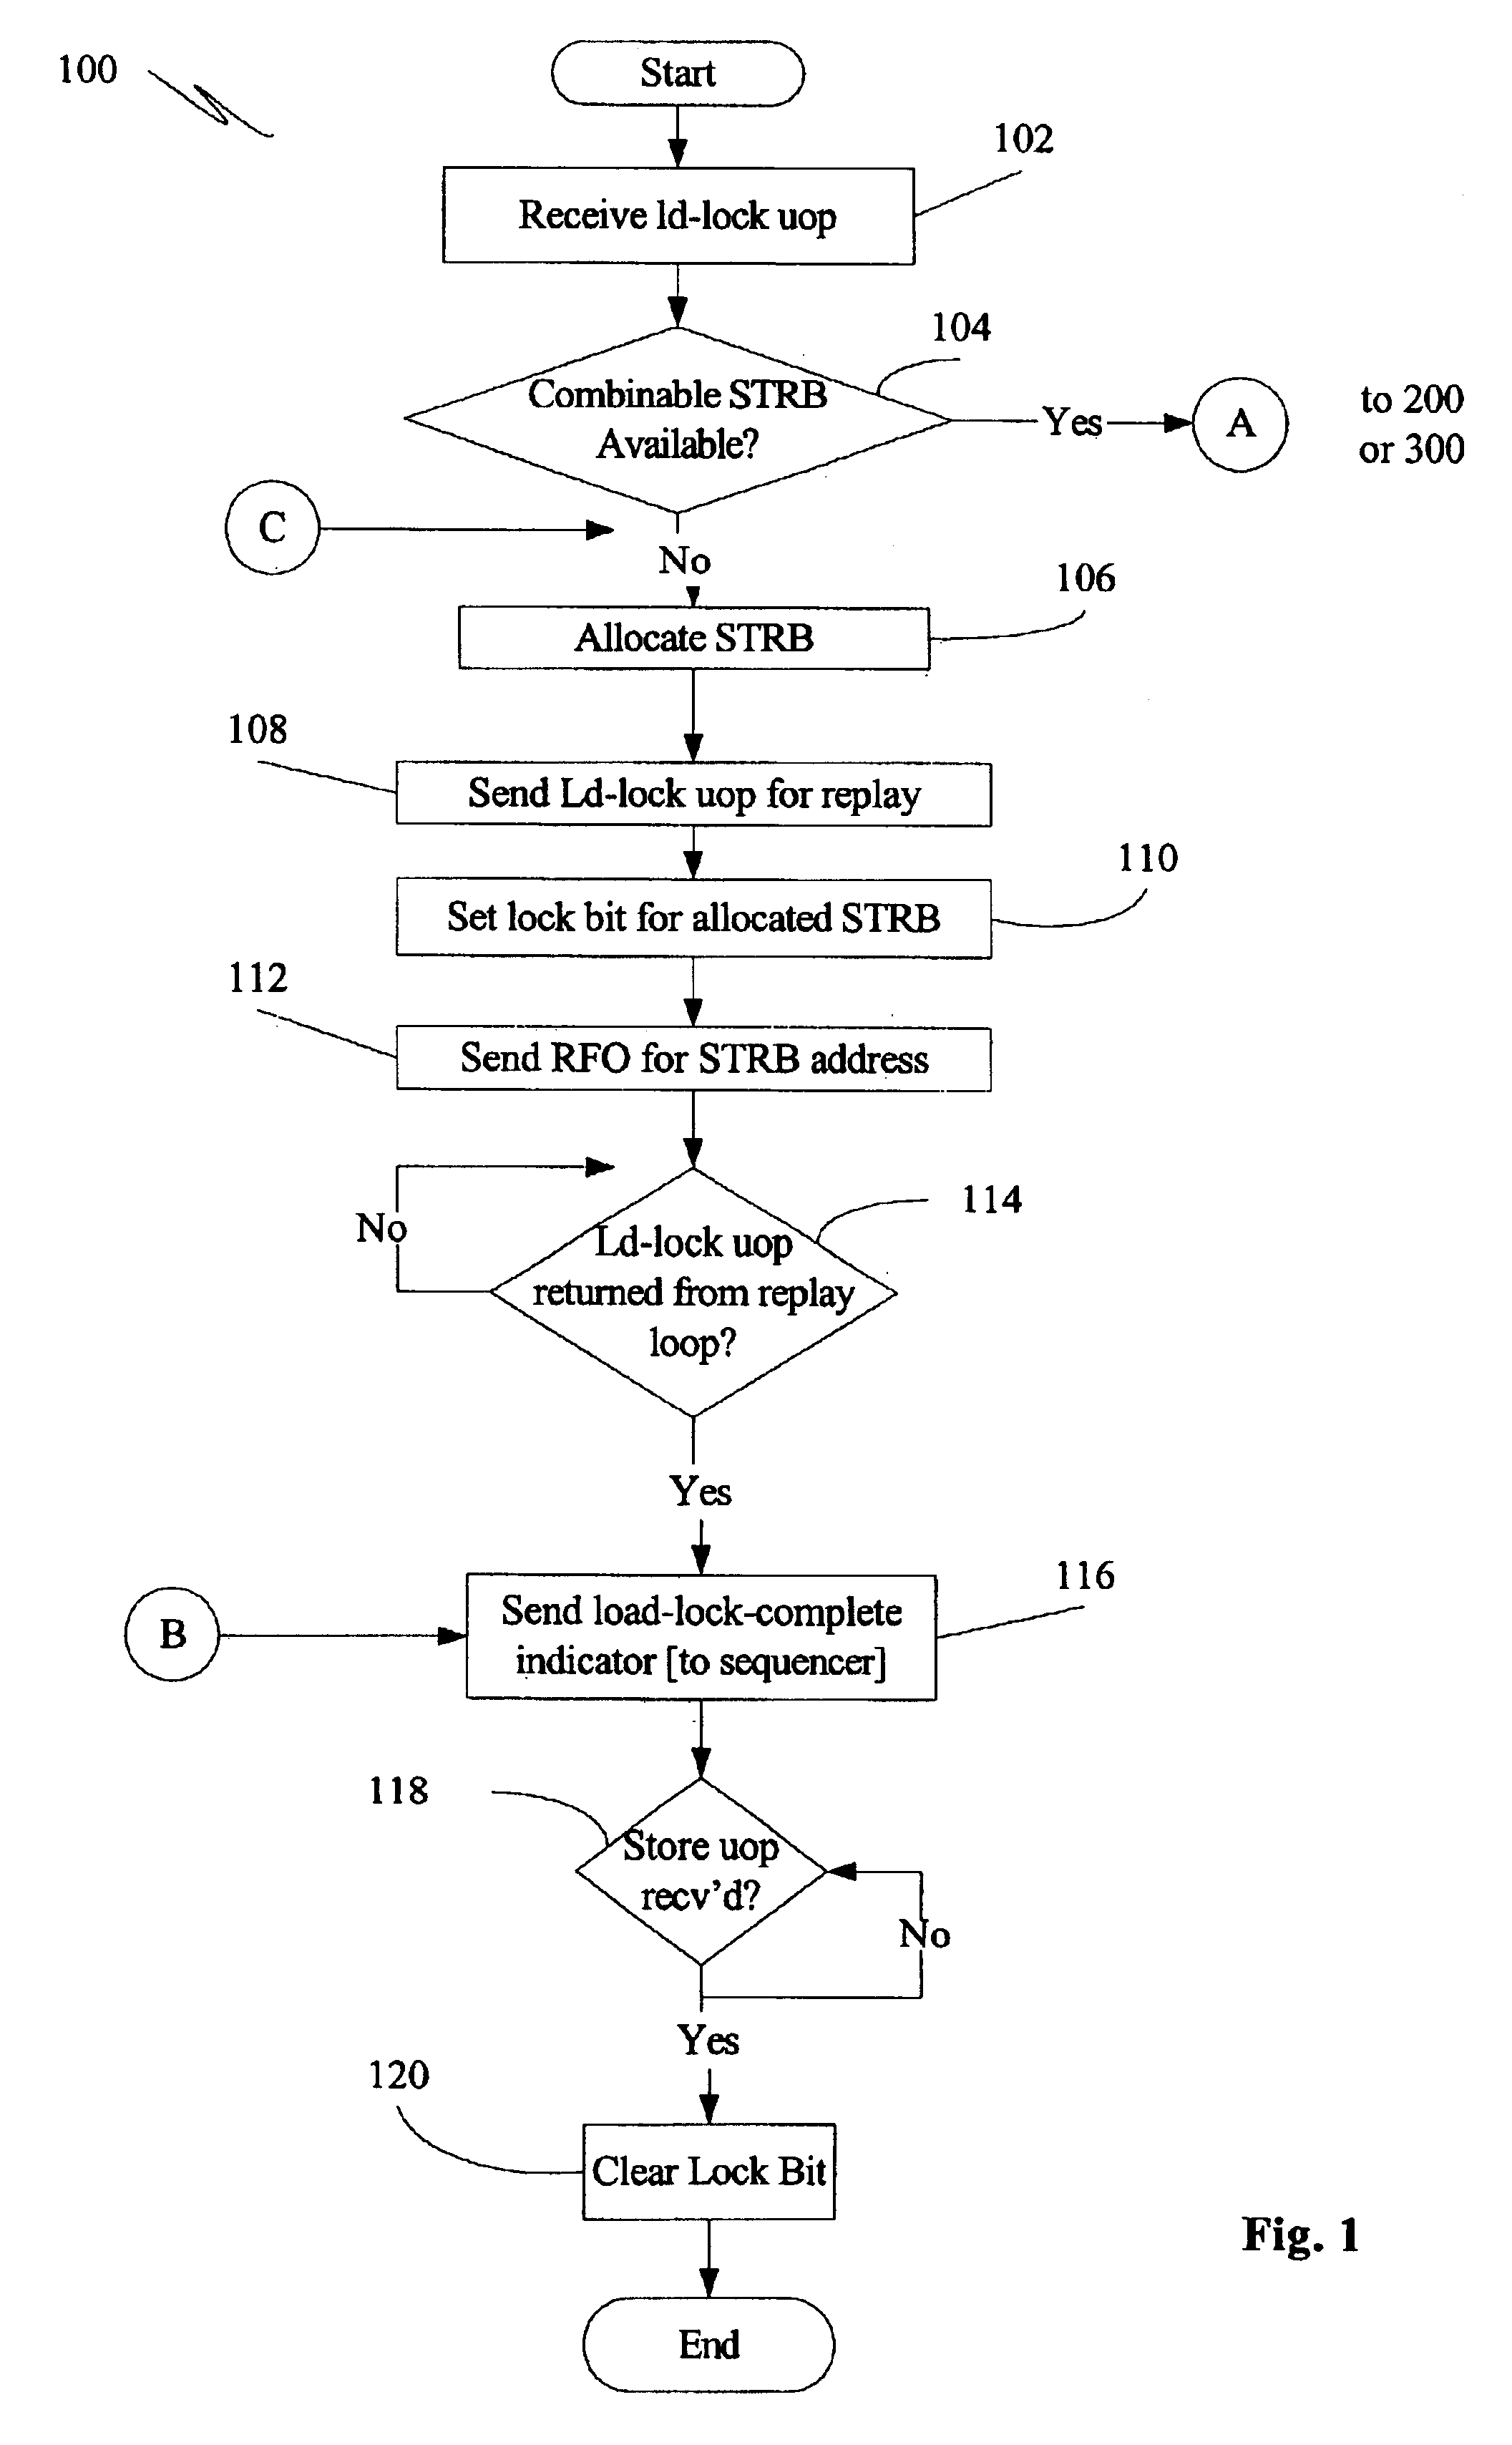 Cache lock mechanism with speculative allocation